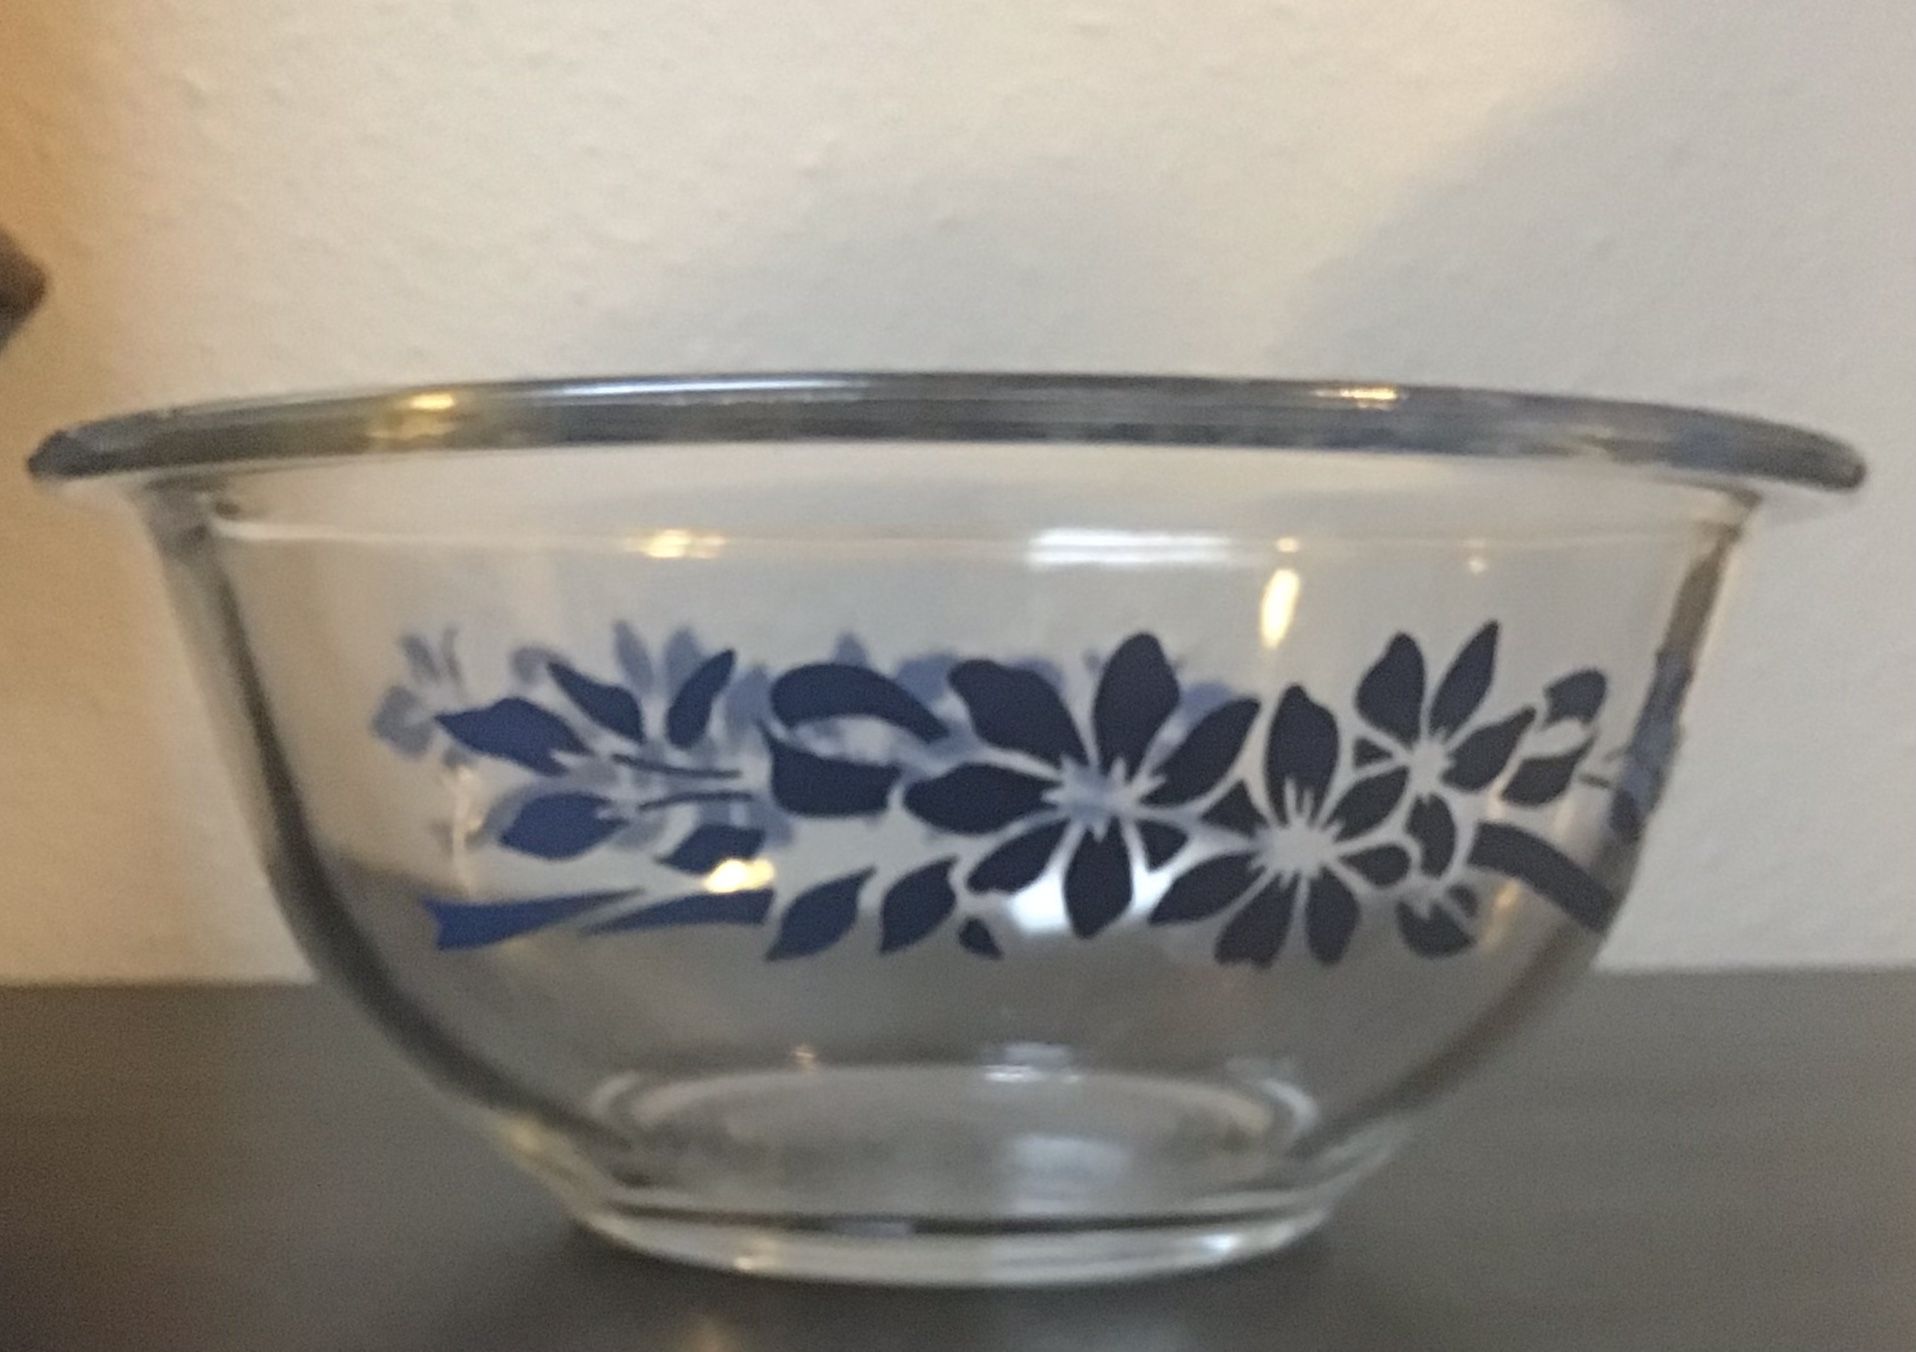 Vintage Pyrex Blue Ribbon And Flower Clear Bottom Bowl 322 1.5 Pints